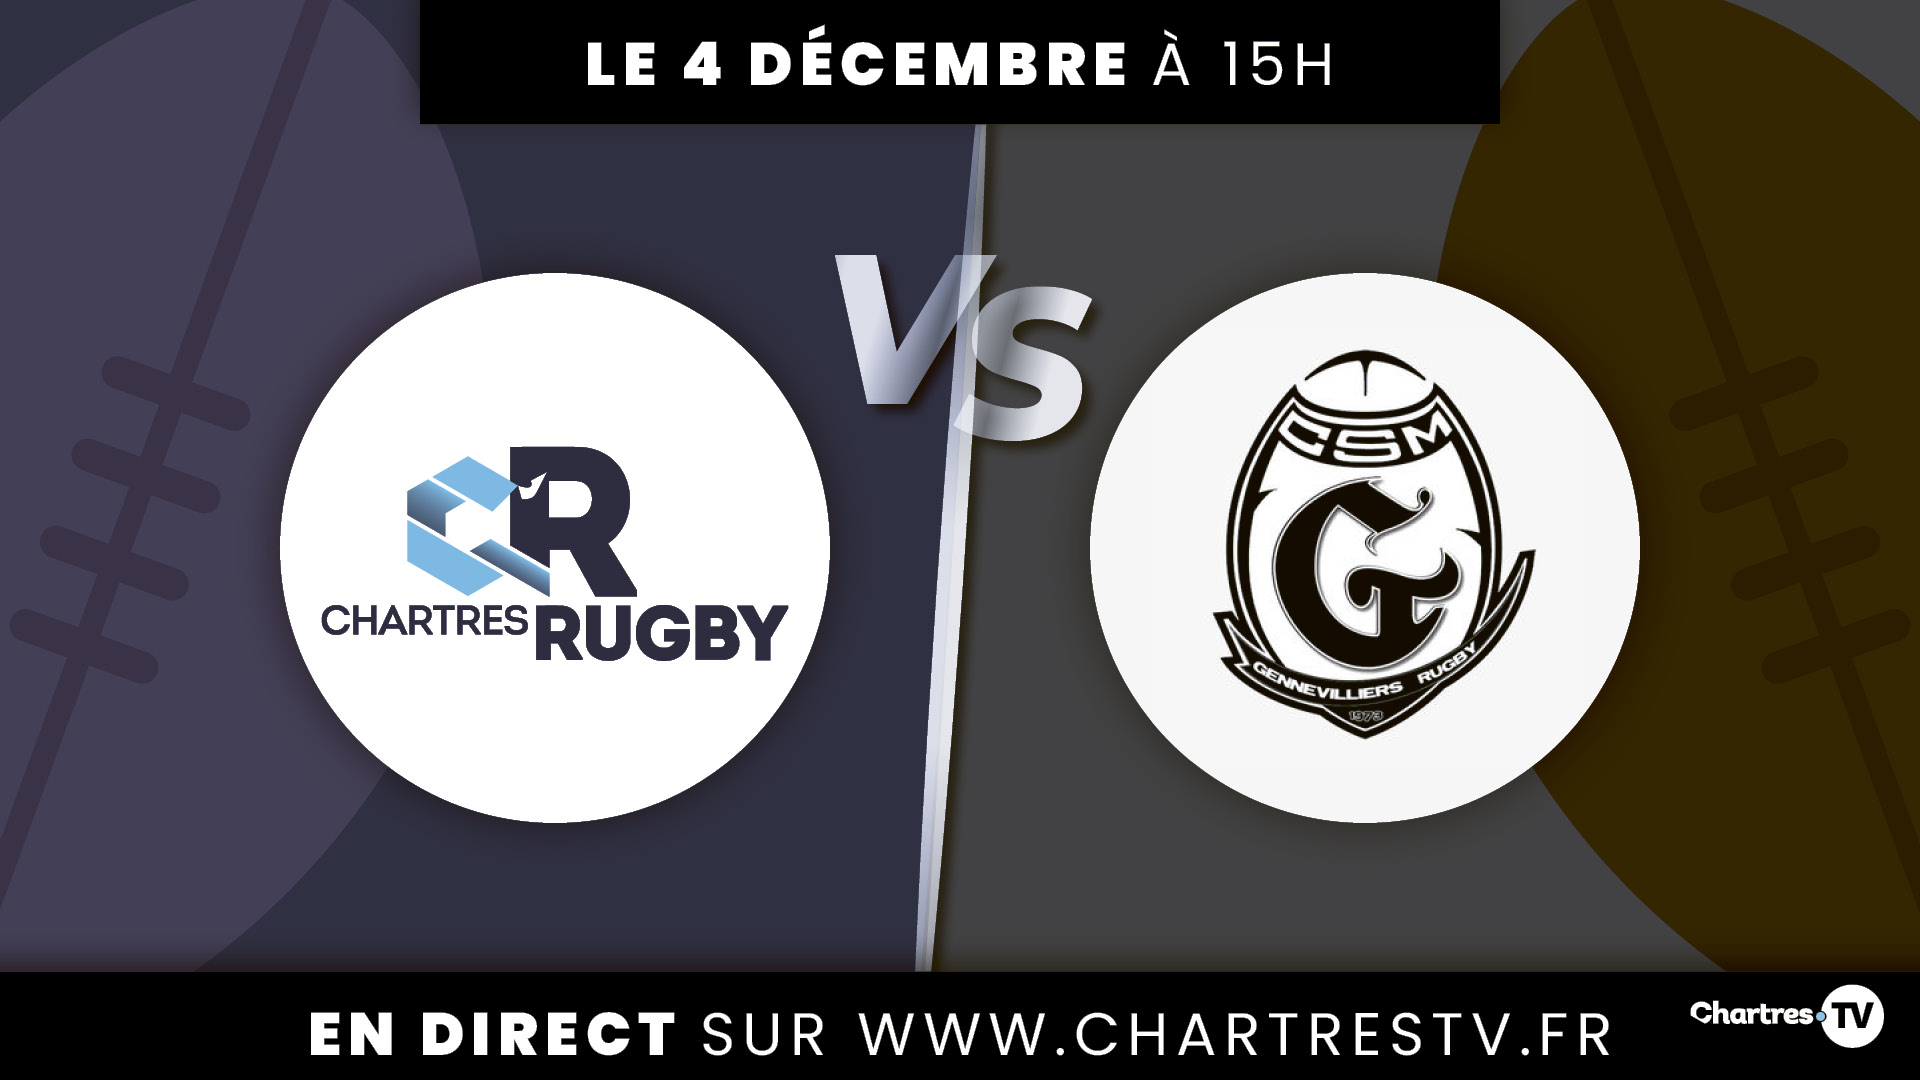 C'Chartres Rugby vs Gennevilliers